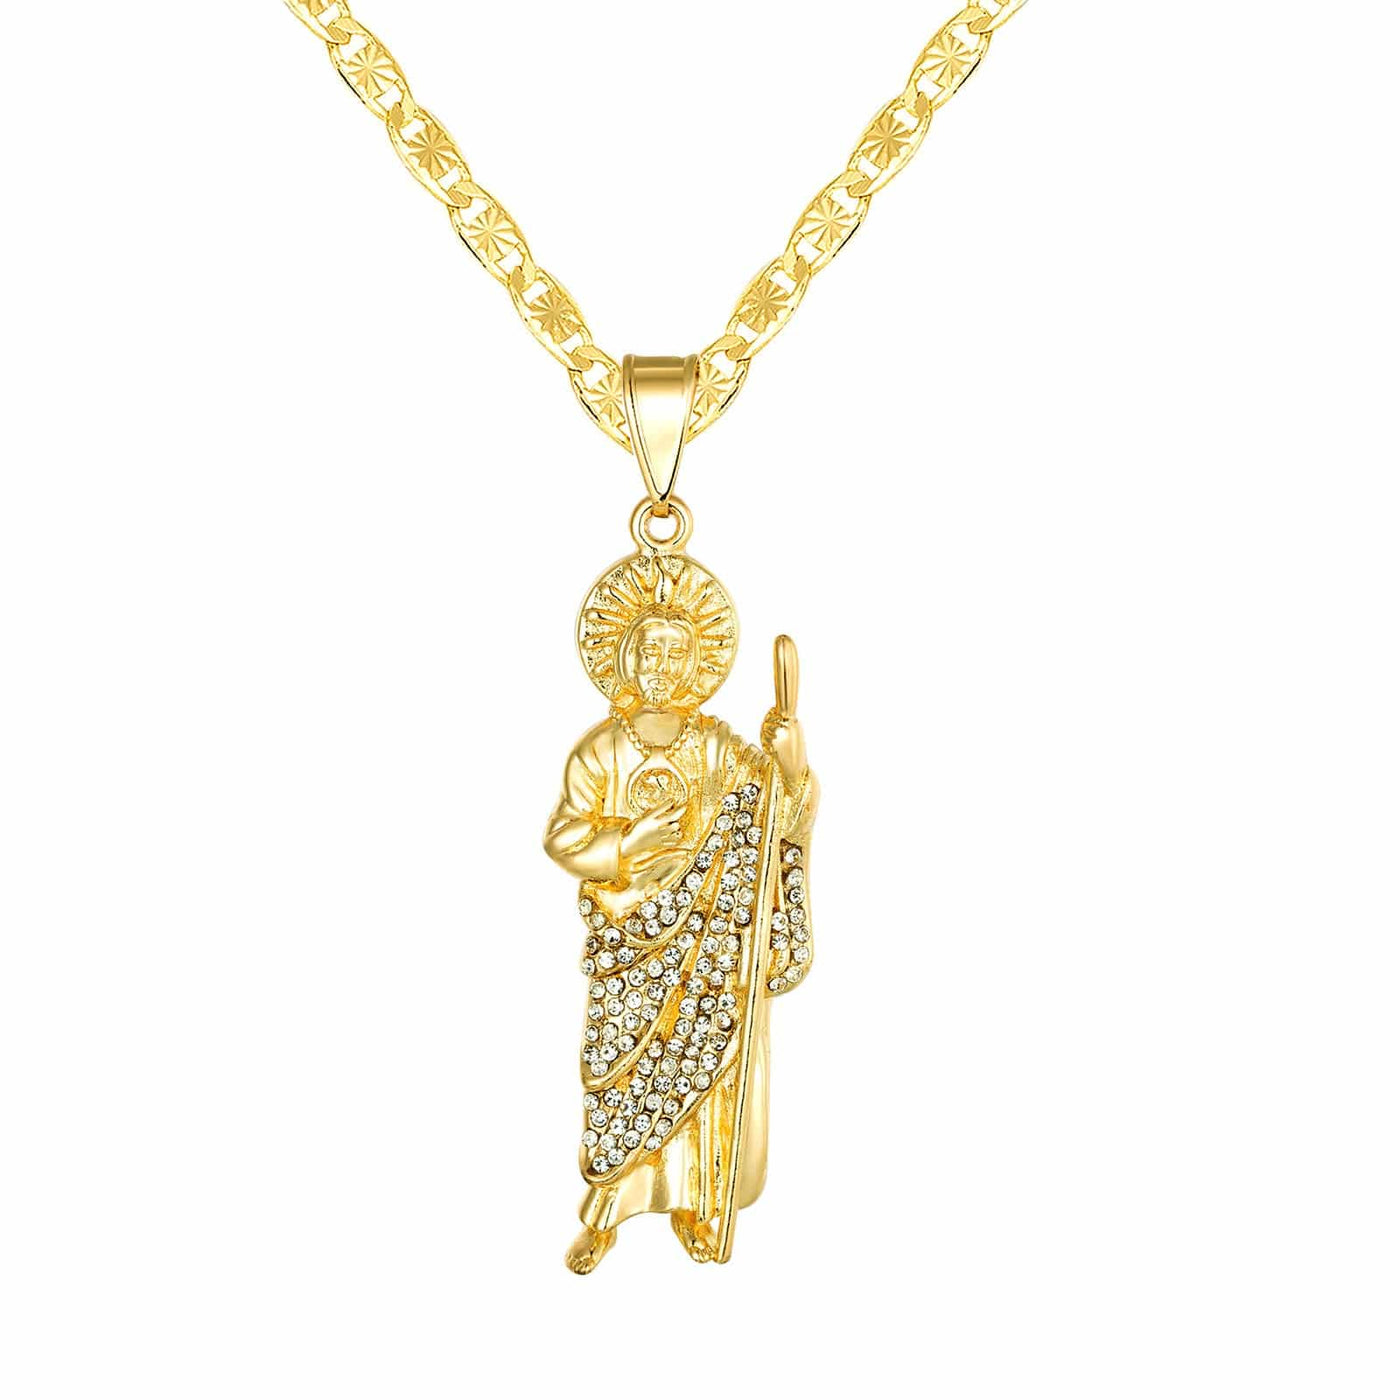 Saint Jude Stones Necklace 14K Gold Filled - Luxe & Co. Jewelry